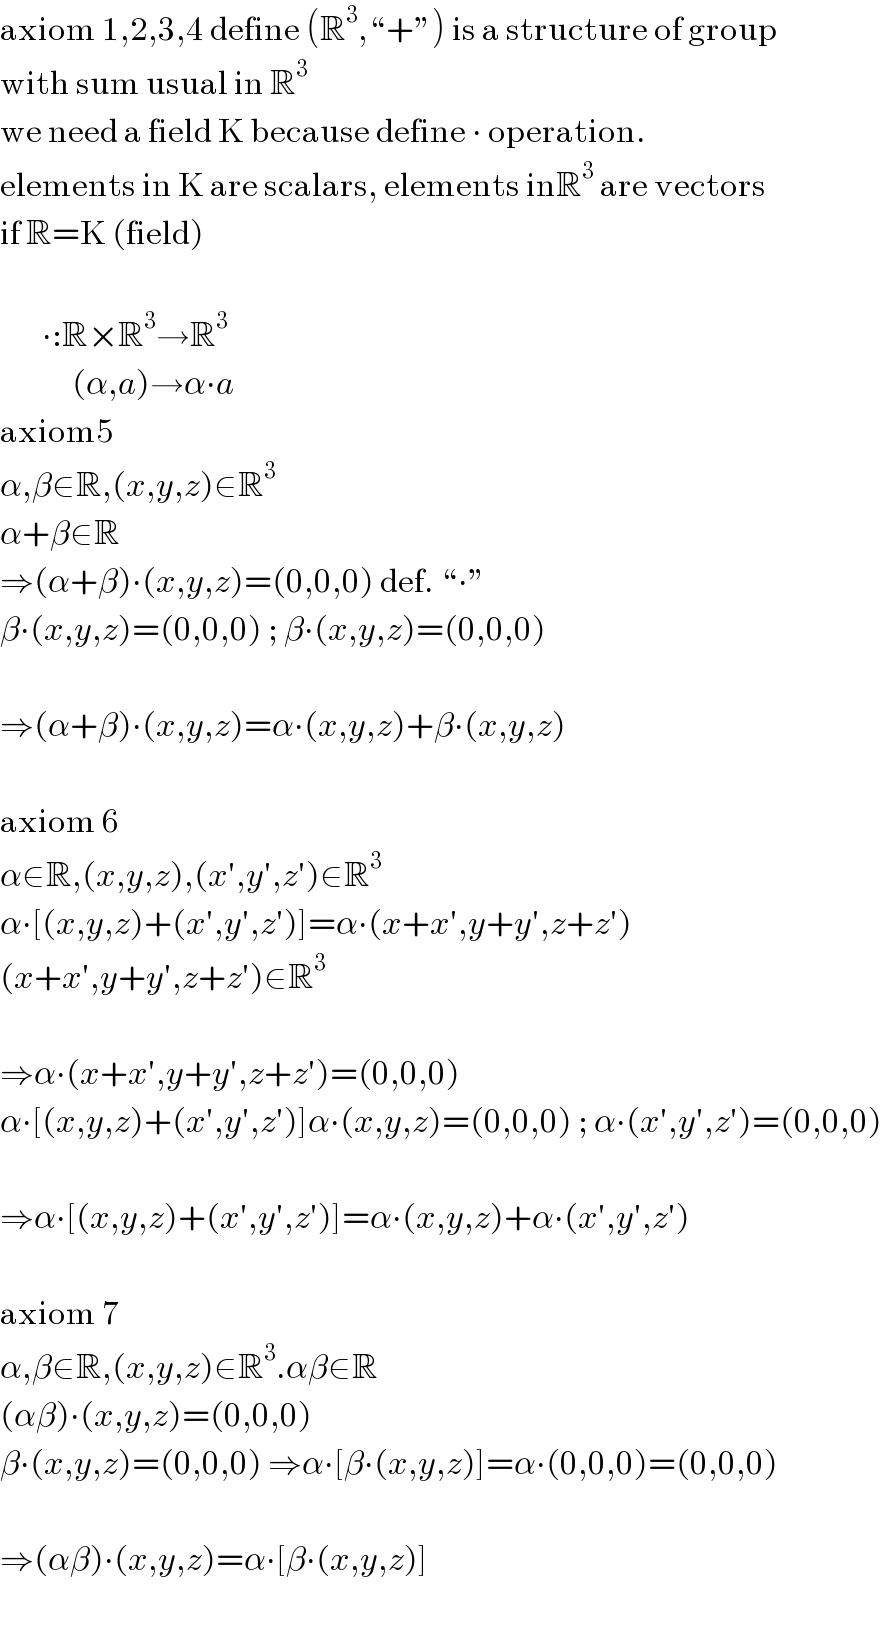 axiom 1,2,3,4 define (R^3 ,“+”) is a structure of group  with sum usual in R^3   we need a field K because define ∙ operation.  elements in K are scalars, elements inR^3  are vectors  if R=K (field)             ∙:R×R^3 →R^3               (α,a)→α∙a  axiom5  α,β∈R,(x,y,z)∈R^3   α+β∈R  ⇒(α+β)∙(x,y,z)=(0,0,0) def. “∙”  β∙(x,y,z)=(0,0,0) ; β∙(x,y,z)=(0,0,0)    ⇒(α+β)∙(x,y,z)=α∙(x,y,z)+β∙(x,y,z)    axiom 6  α∈R,(x,y,z),(x′,y′,z′)∈R^3   α∙[(x,y,z)+(x′,y′,z′)]=α∙(x+x′,y+y′,z+z′)  (x+x′,y+y′,z+z′)∈R^3     ⇒α∙(x+x′,y+y′,z+z′)=(0,0,0)  α∙[(x,y,z)+(x′,y′,z′)]α∙(x,y,z)=(0,0,0) ; α∙(x′,y′,z′)=(0,0,0)    ⇒α∙[(x,y,z)+(x′,y′,z′)]=α∙(x,y,z)+α∙(x′,y′,z′)    axiom 7  α,β∈R,(x,y,z)∈R^3 .αβ∈R  (αβ)∙(x,y,z)=(0,0,0)  β∙(x,y,z)=(0,0,0) ⇒α∙[β∙(x,y,z)]=α∙(0,0,0)=(0,0,0)    ⇒(αβ)∙(x,y,z)=α∙[β∙(x,y,z)]    